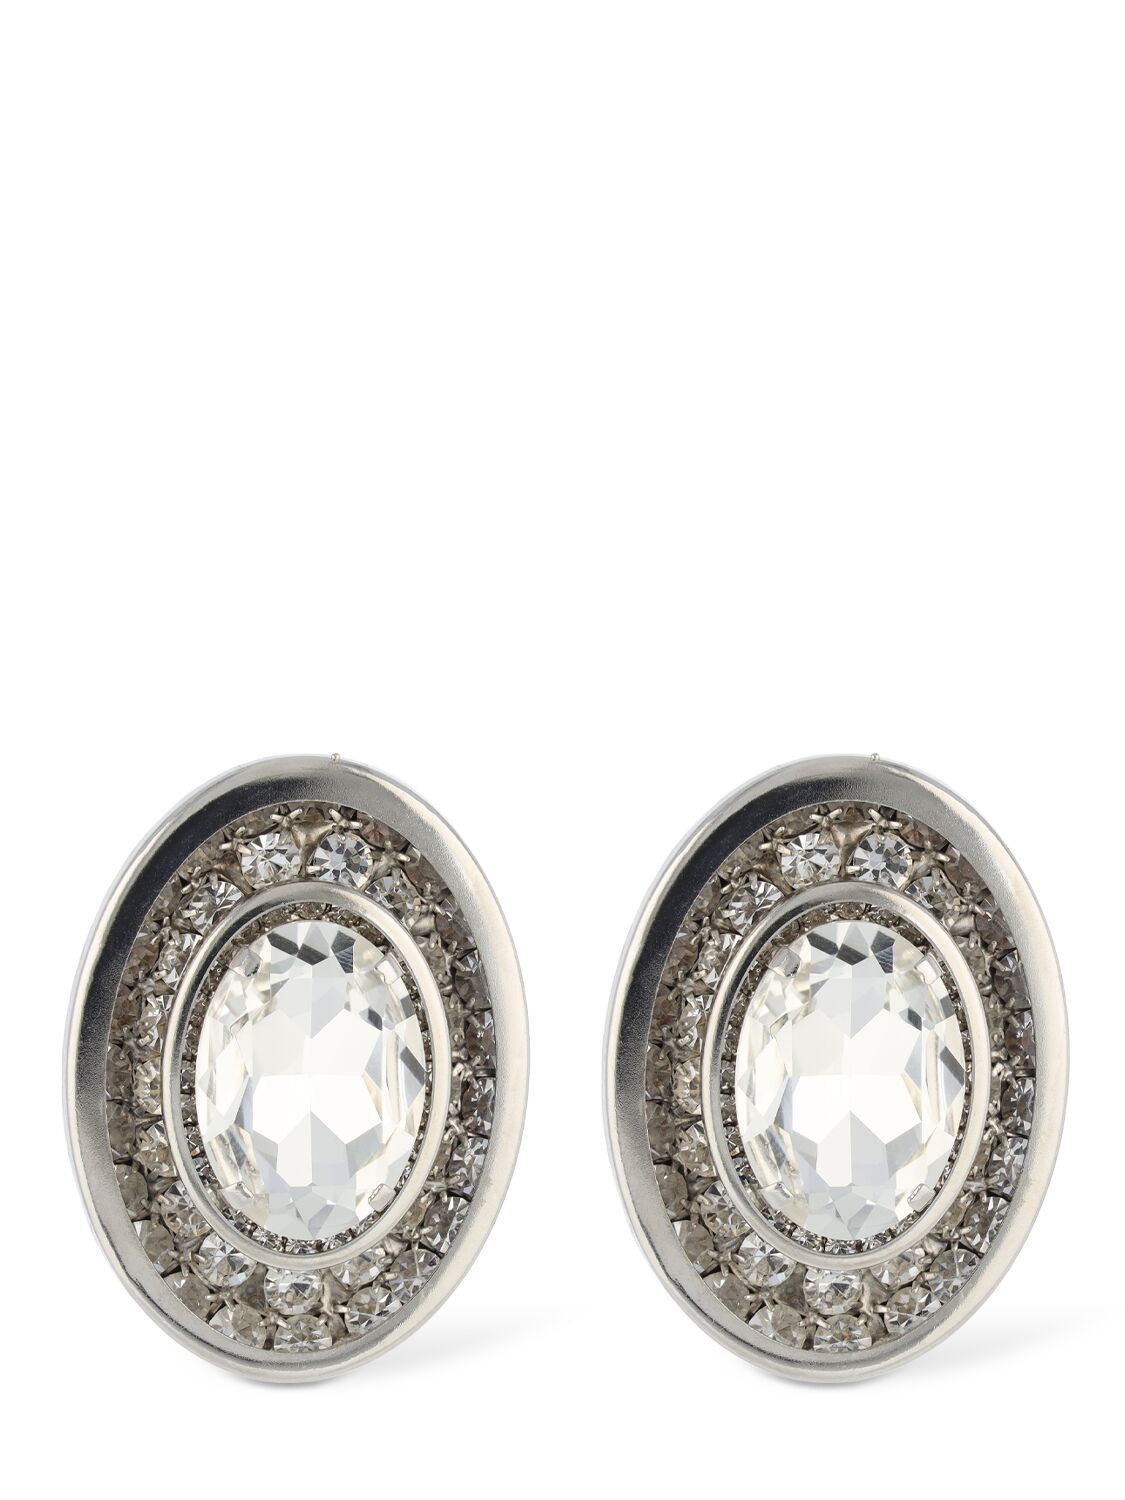 Image of Large Oval Crystal Earrings